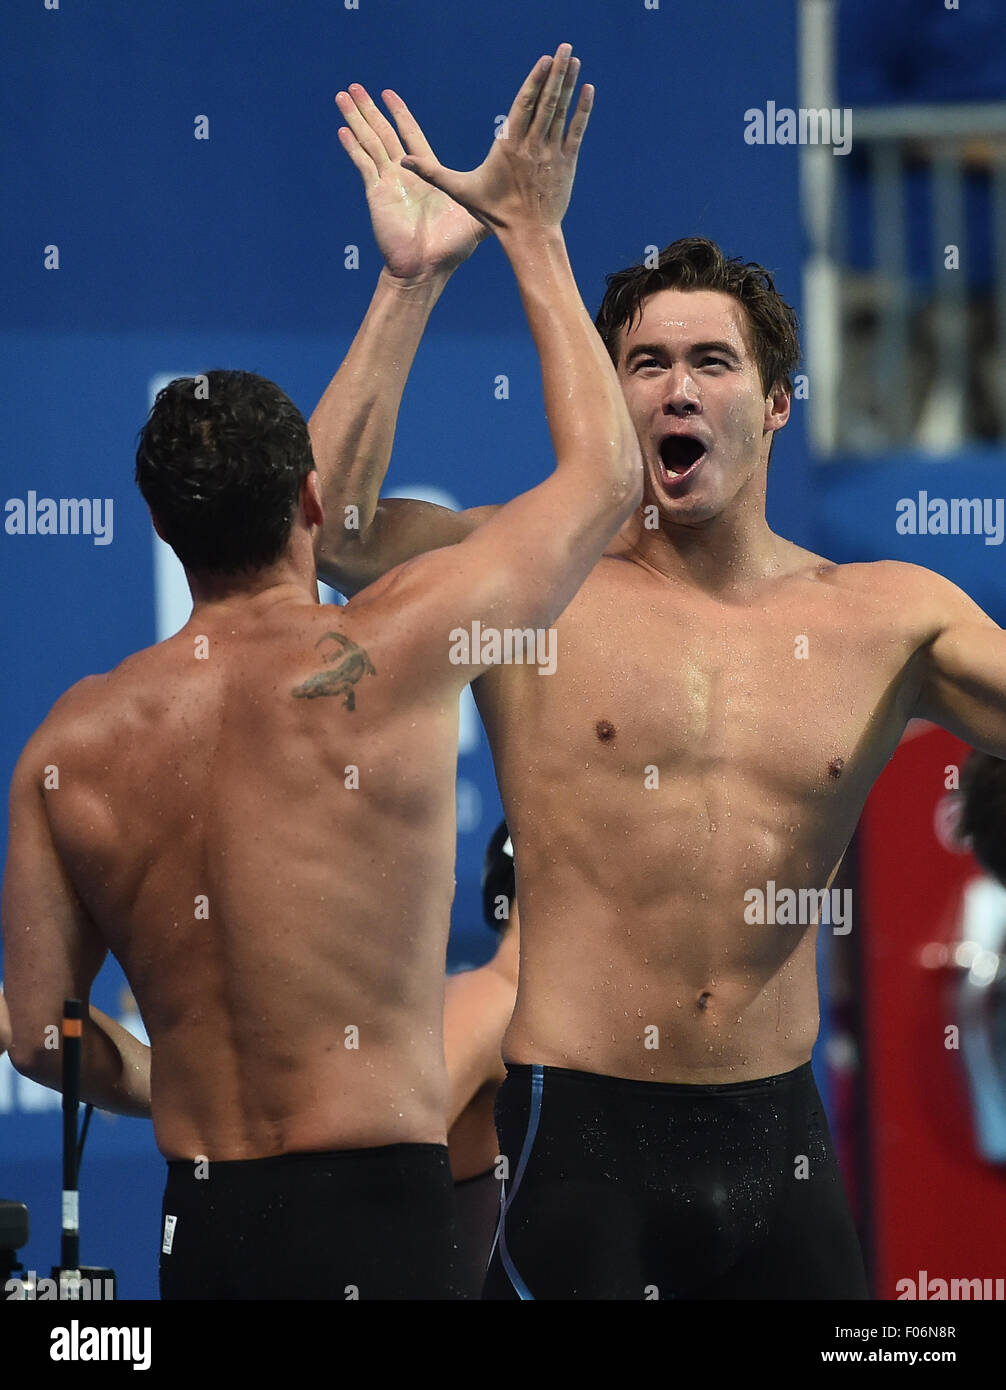 Kazan, Russia. 8th Aug, 2015. Nathan Adrian (R) and Ryan Lochte of the relay team of the United States celebrate after the mixed 4x100m freestyle relay final at FINA World Championships in Kazan, Russia, Aug. 8, 2015. The United States claimed the title and broke the world record in a time of 3 minutes 23.05 seconds. © Dai Tianfang/Xinhua/Alamy Live News Stock Photo